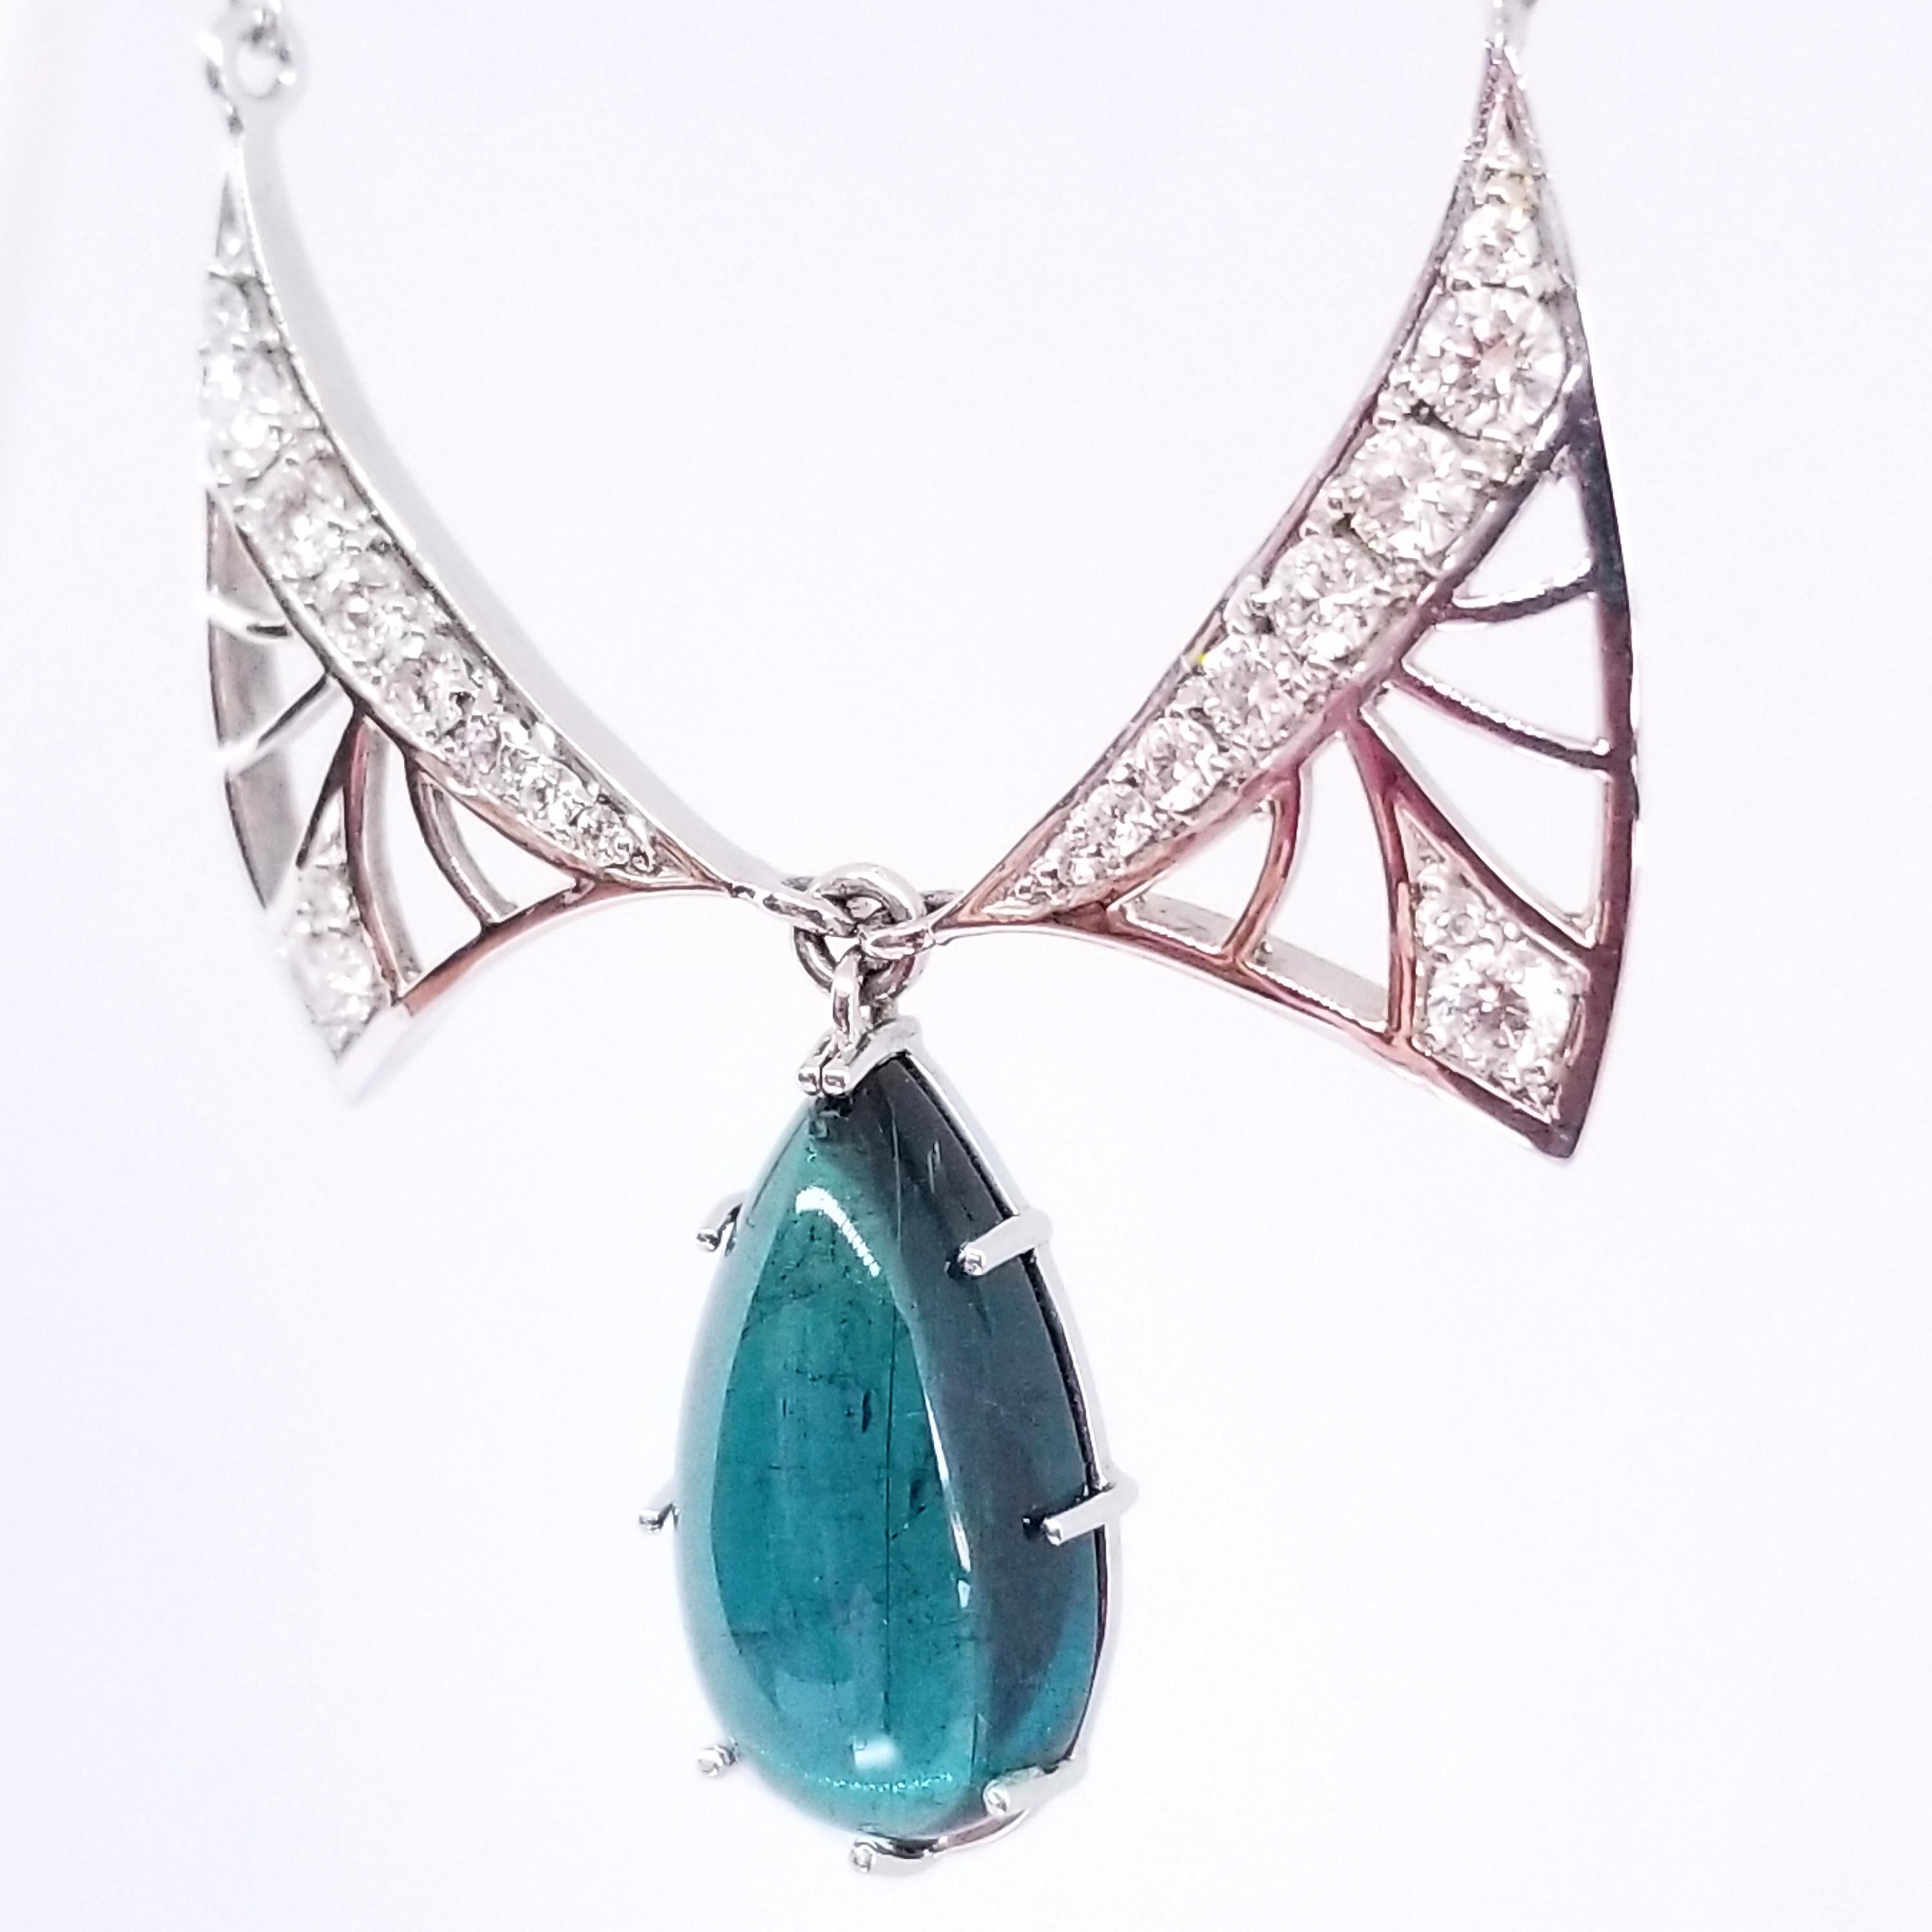 This Custom Designed and Crafted, One of a Kind Drop Necklace by Artisan Tom Castor features in Art Nouveau Tradition, Delicate and Open, Diamond Wings. Framed by the Wings is a Natural Indicolite Blue Tourmaline of 7.55 Carats in weight and a